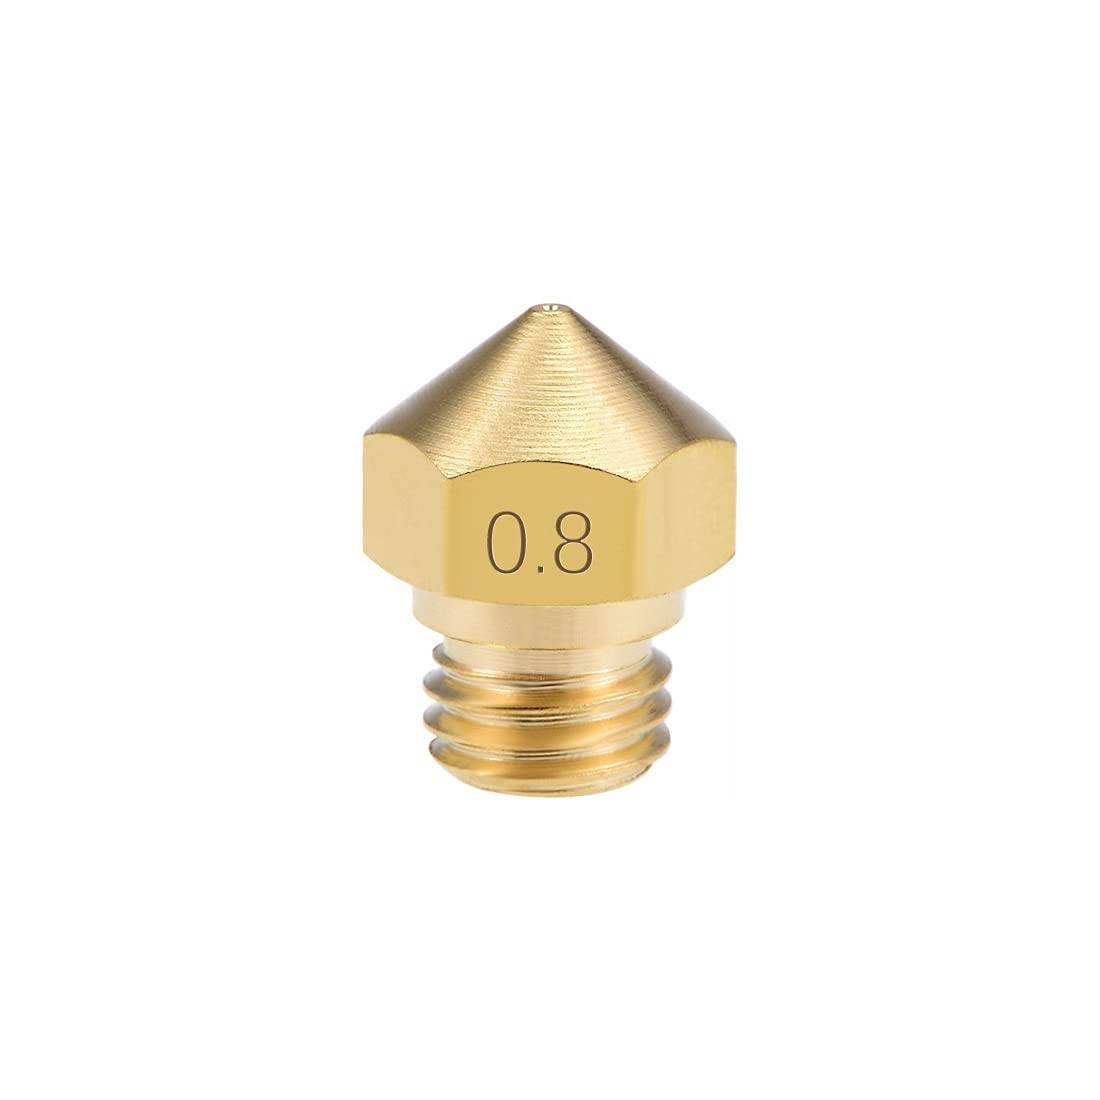 0.8mm 3D Printer Nozzle Head M7 Thread Replacement for MK10 1.75mm Extruder Print- RS2710 - REES52